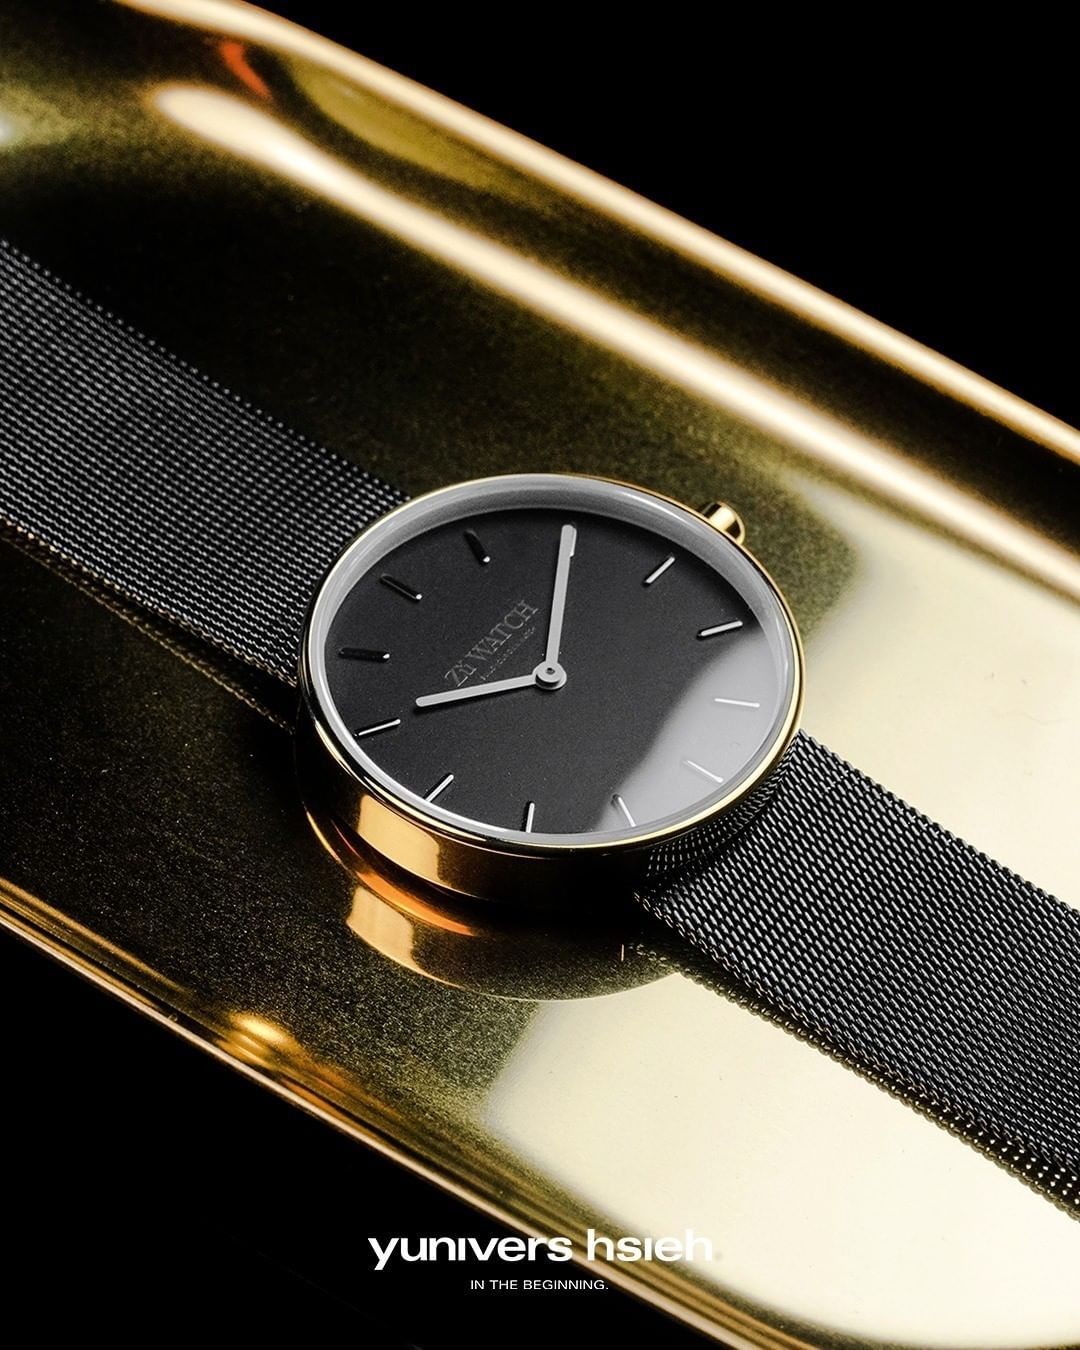 SIMPLE BLACK｜CLASSIC GOLD｜ZUWATCH SERIES - yunivers hsieh